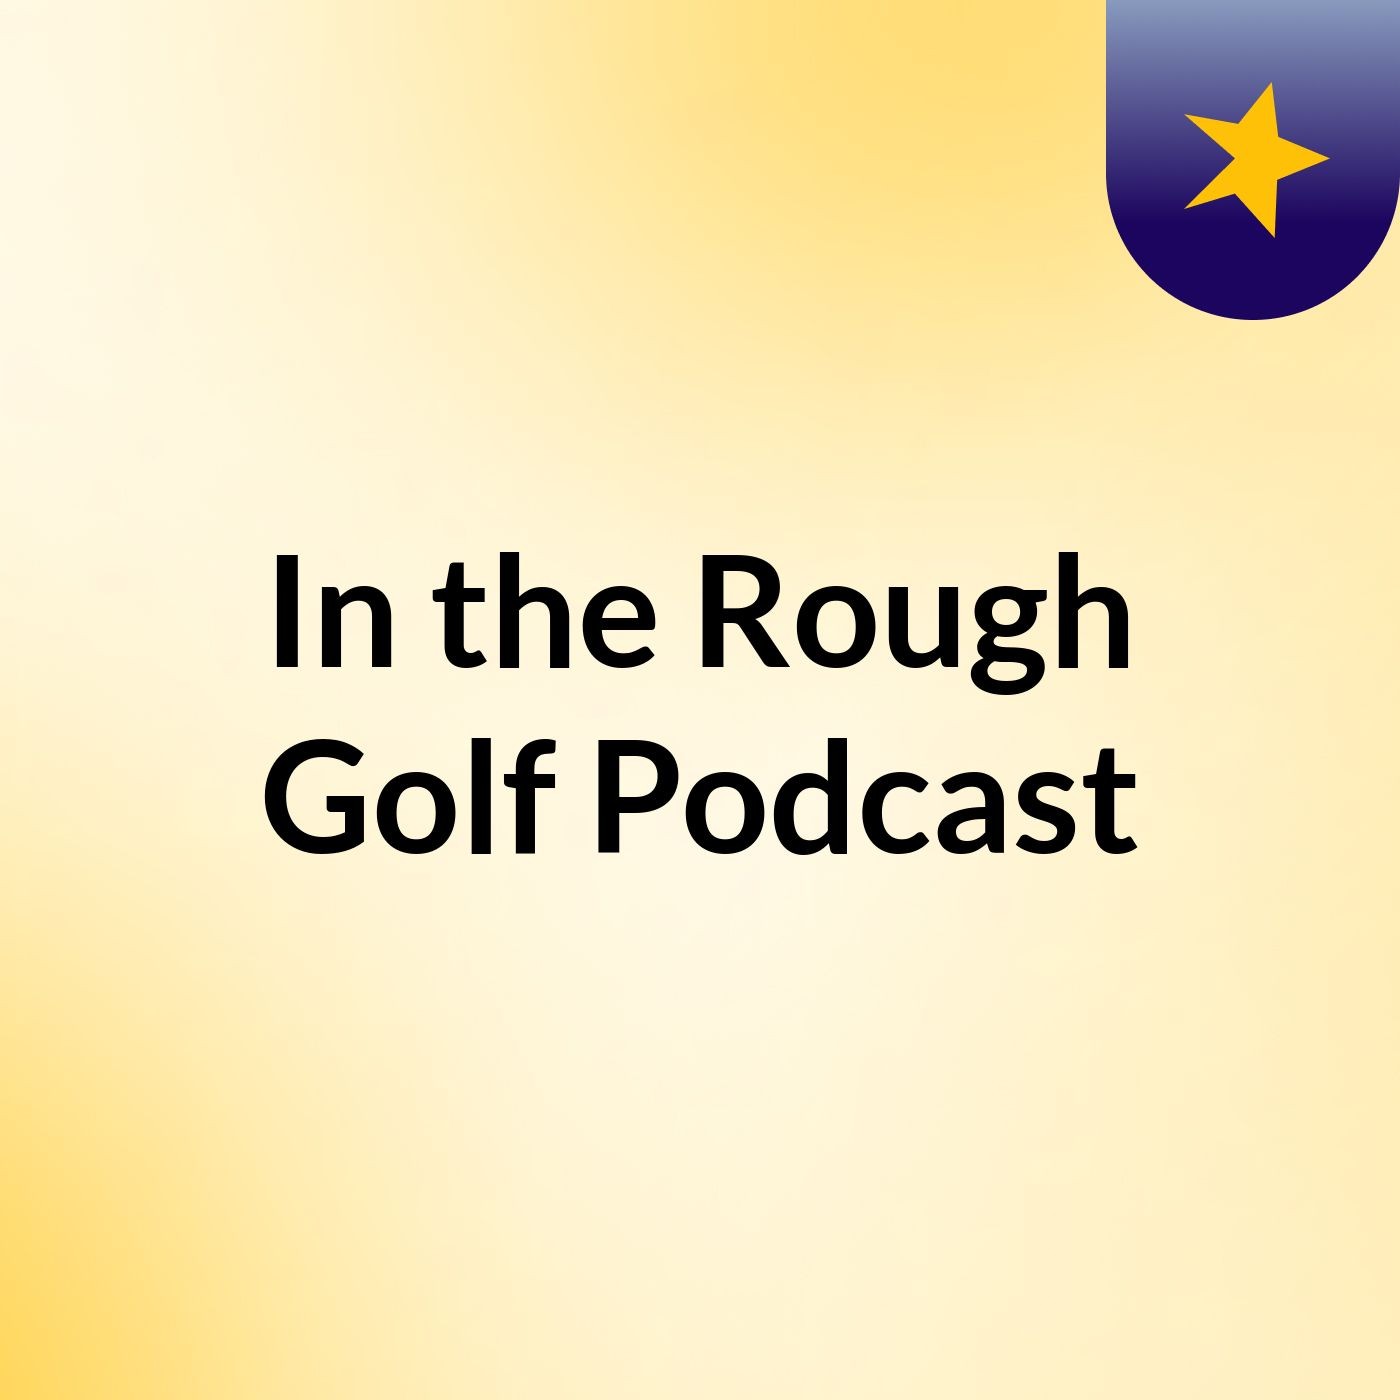 In the Rough Golf Podcast